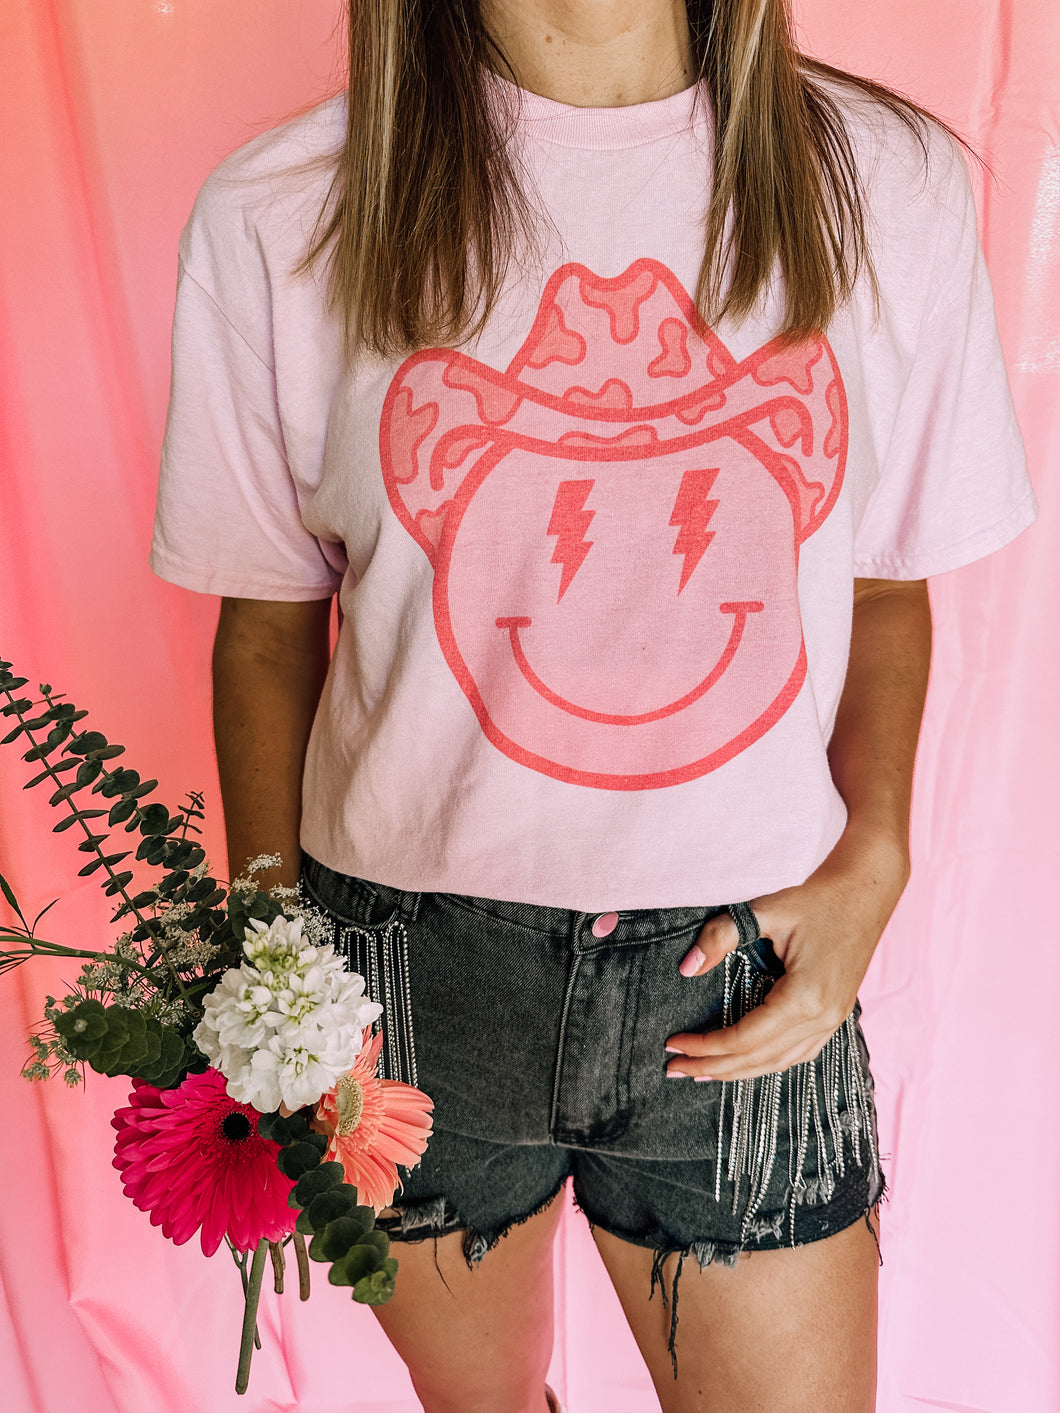 Smiley Cowgirl Tee